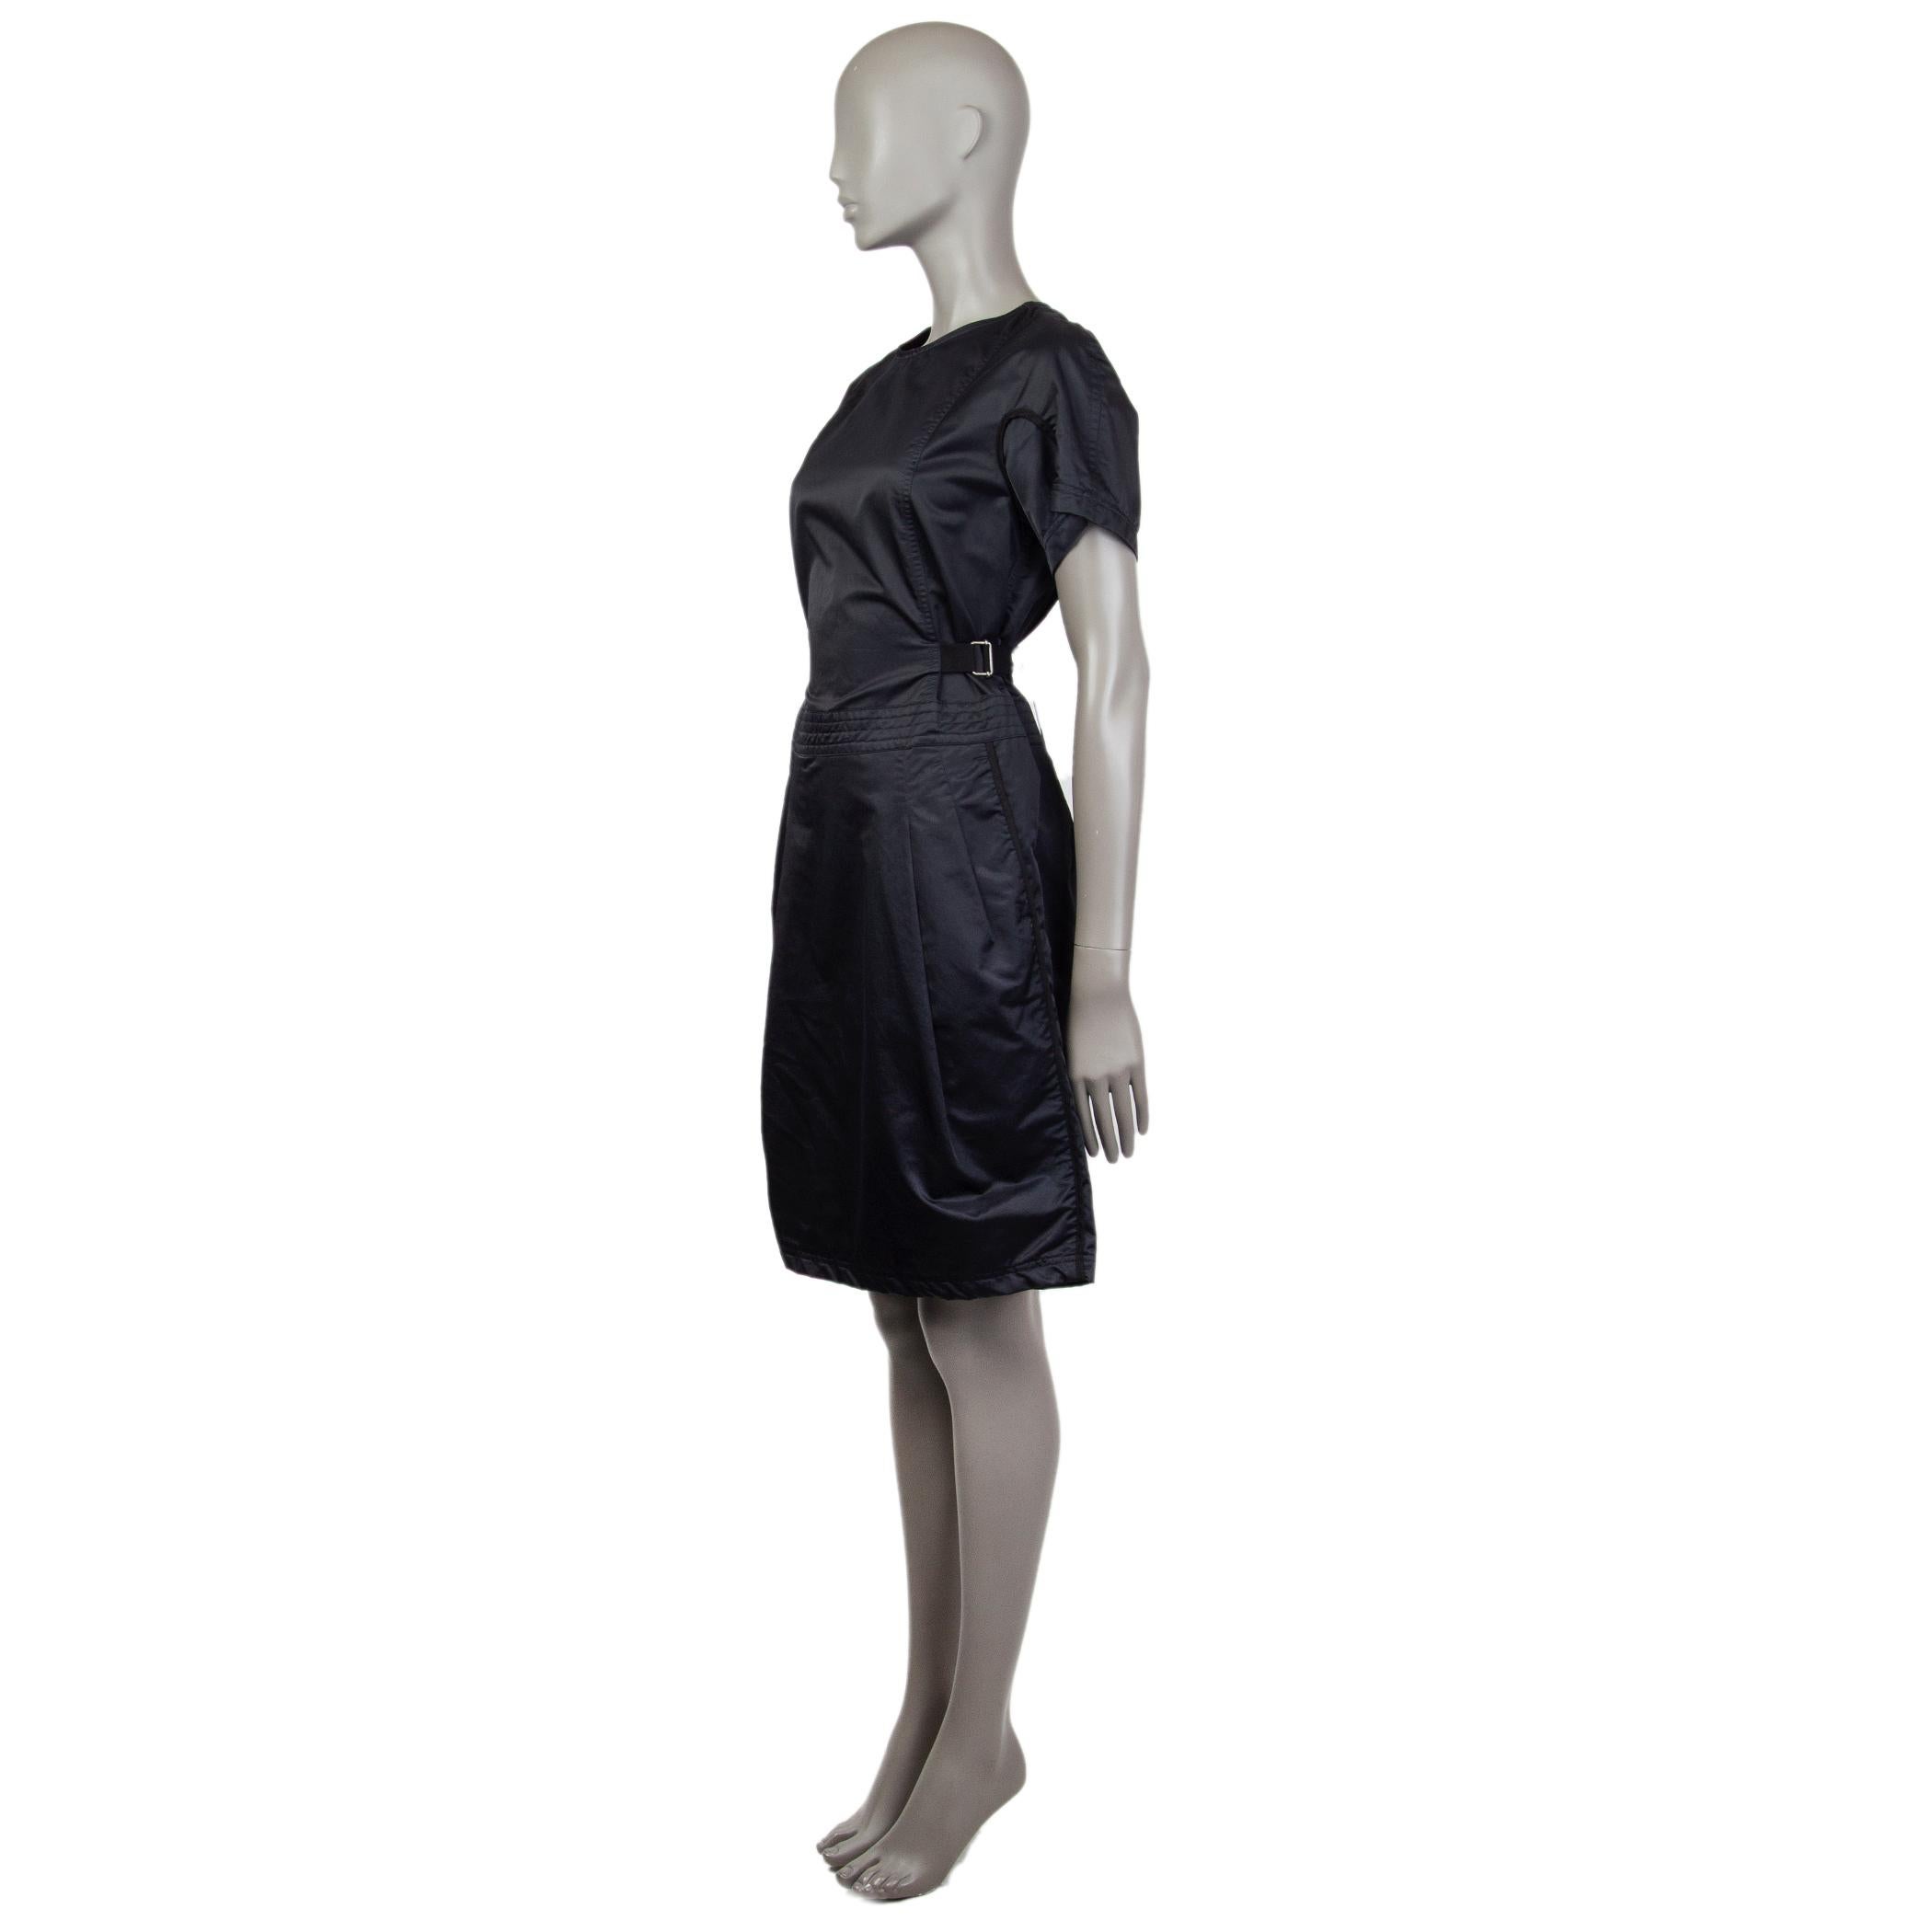 100% authentic Dries van Noten short-sleeve dress in midnight blue fabric. With black piping, crew neck, two slit pockets on the side, pleated skirt, and two attached cinching belts on the sides. Closes with silver-tone zipper on the shoulder.